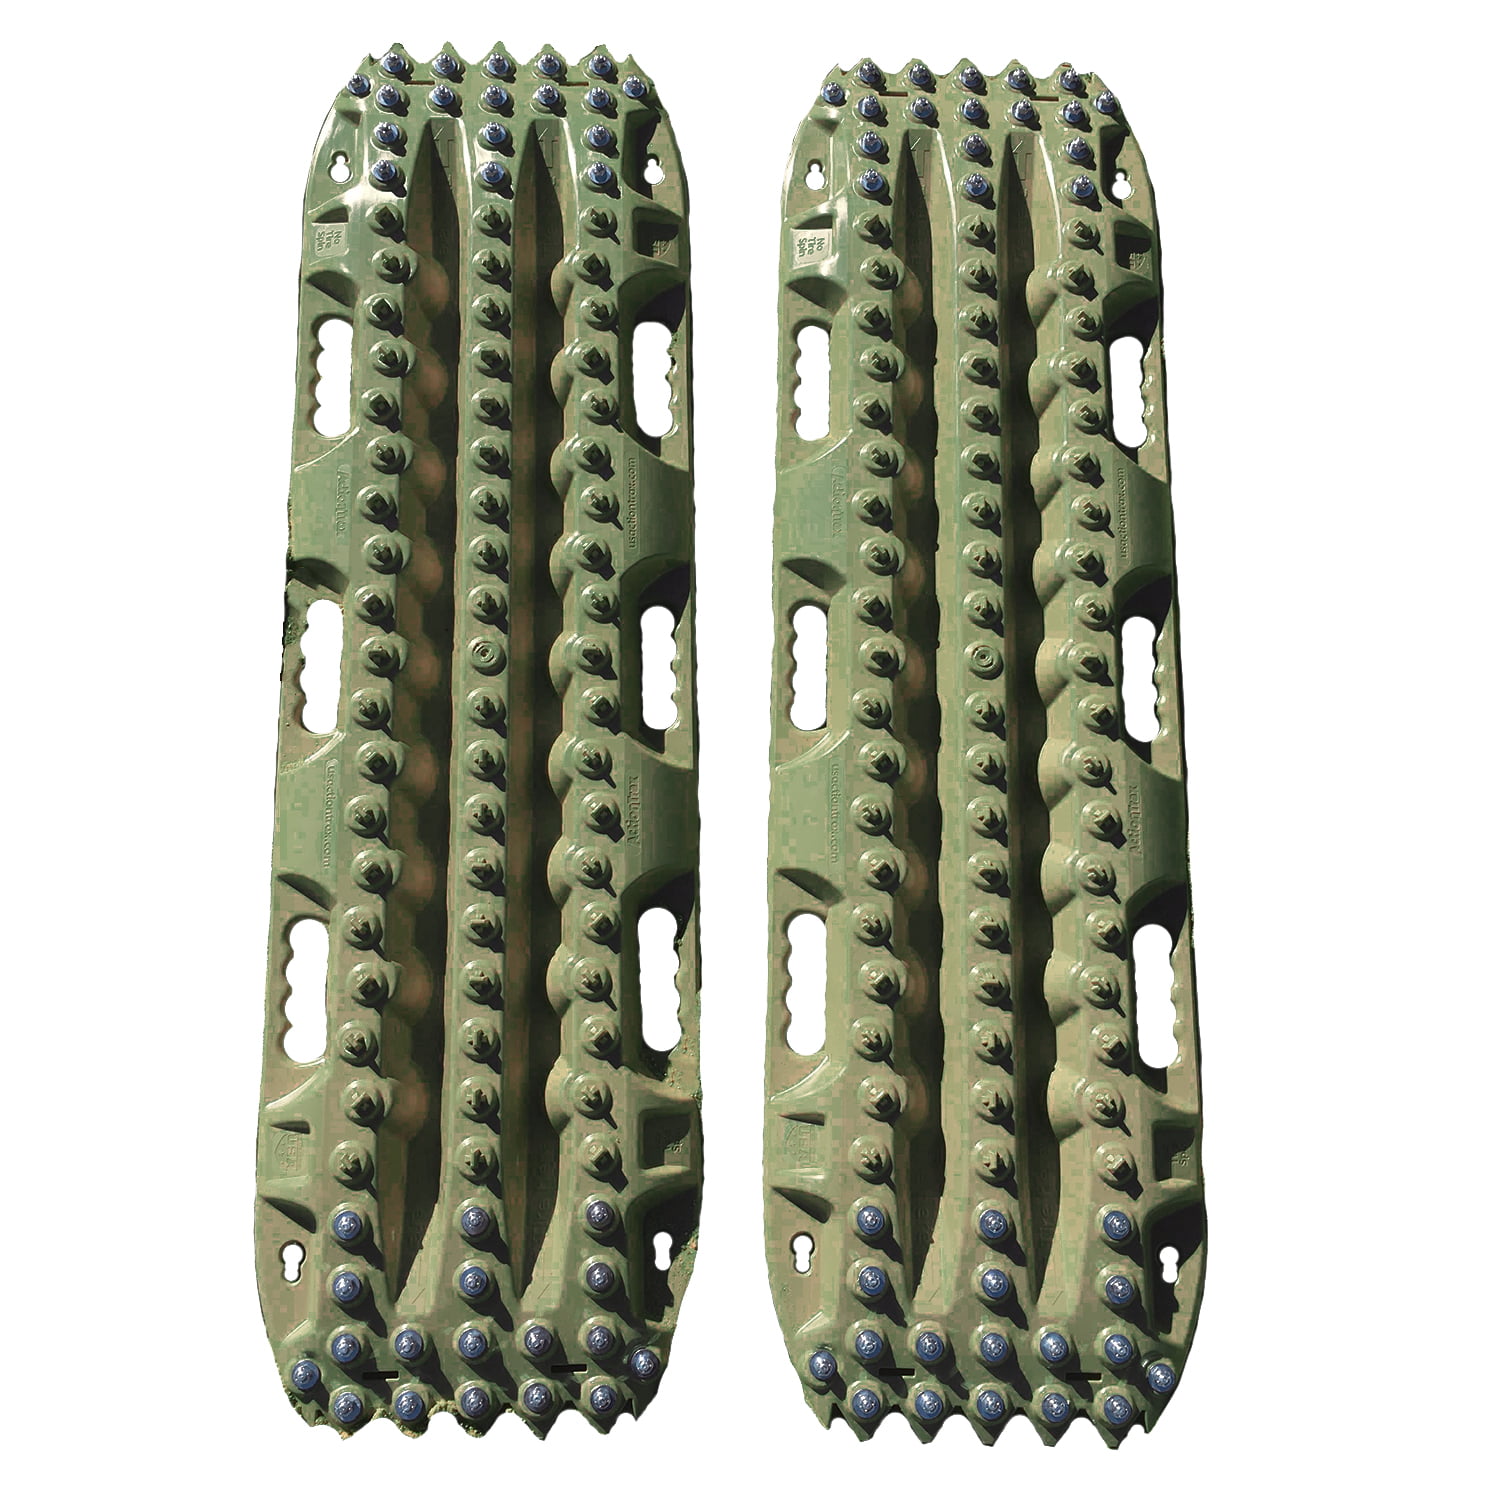 ActionTrax Self Recovery Track System for Snow Olive Drab Nylon with Metal Studs Sand 1 Pair Mud and Silt 